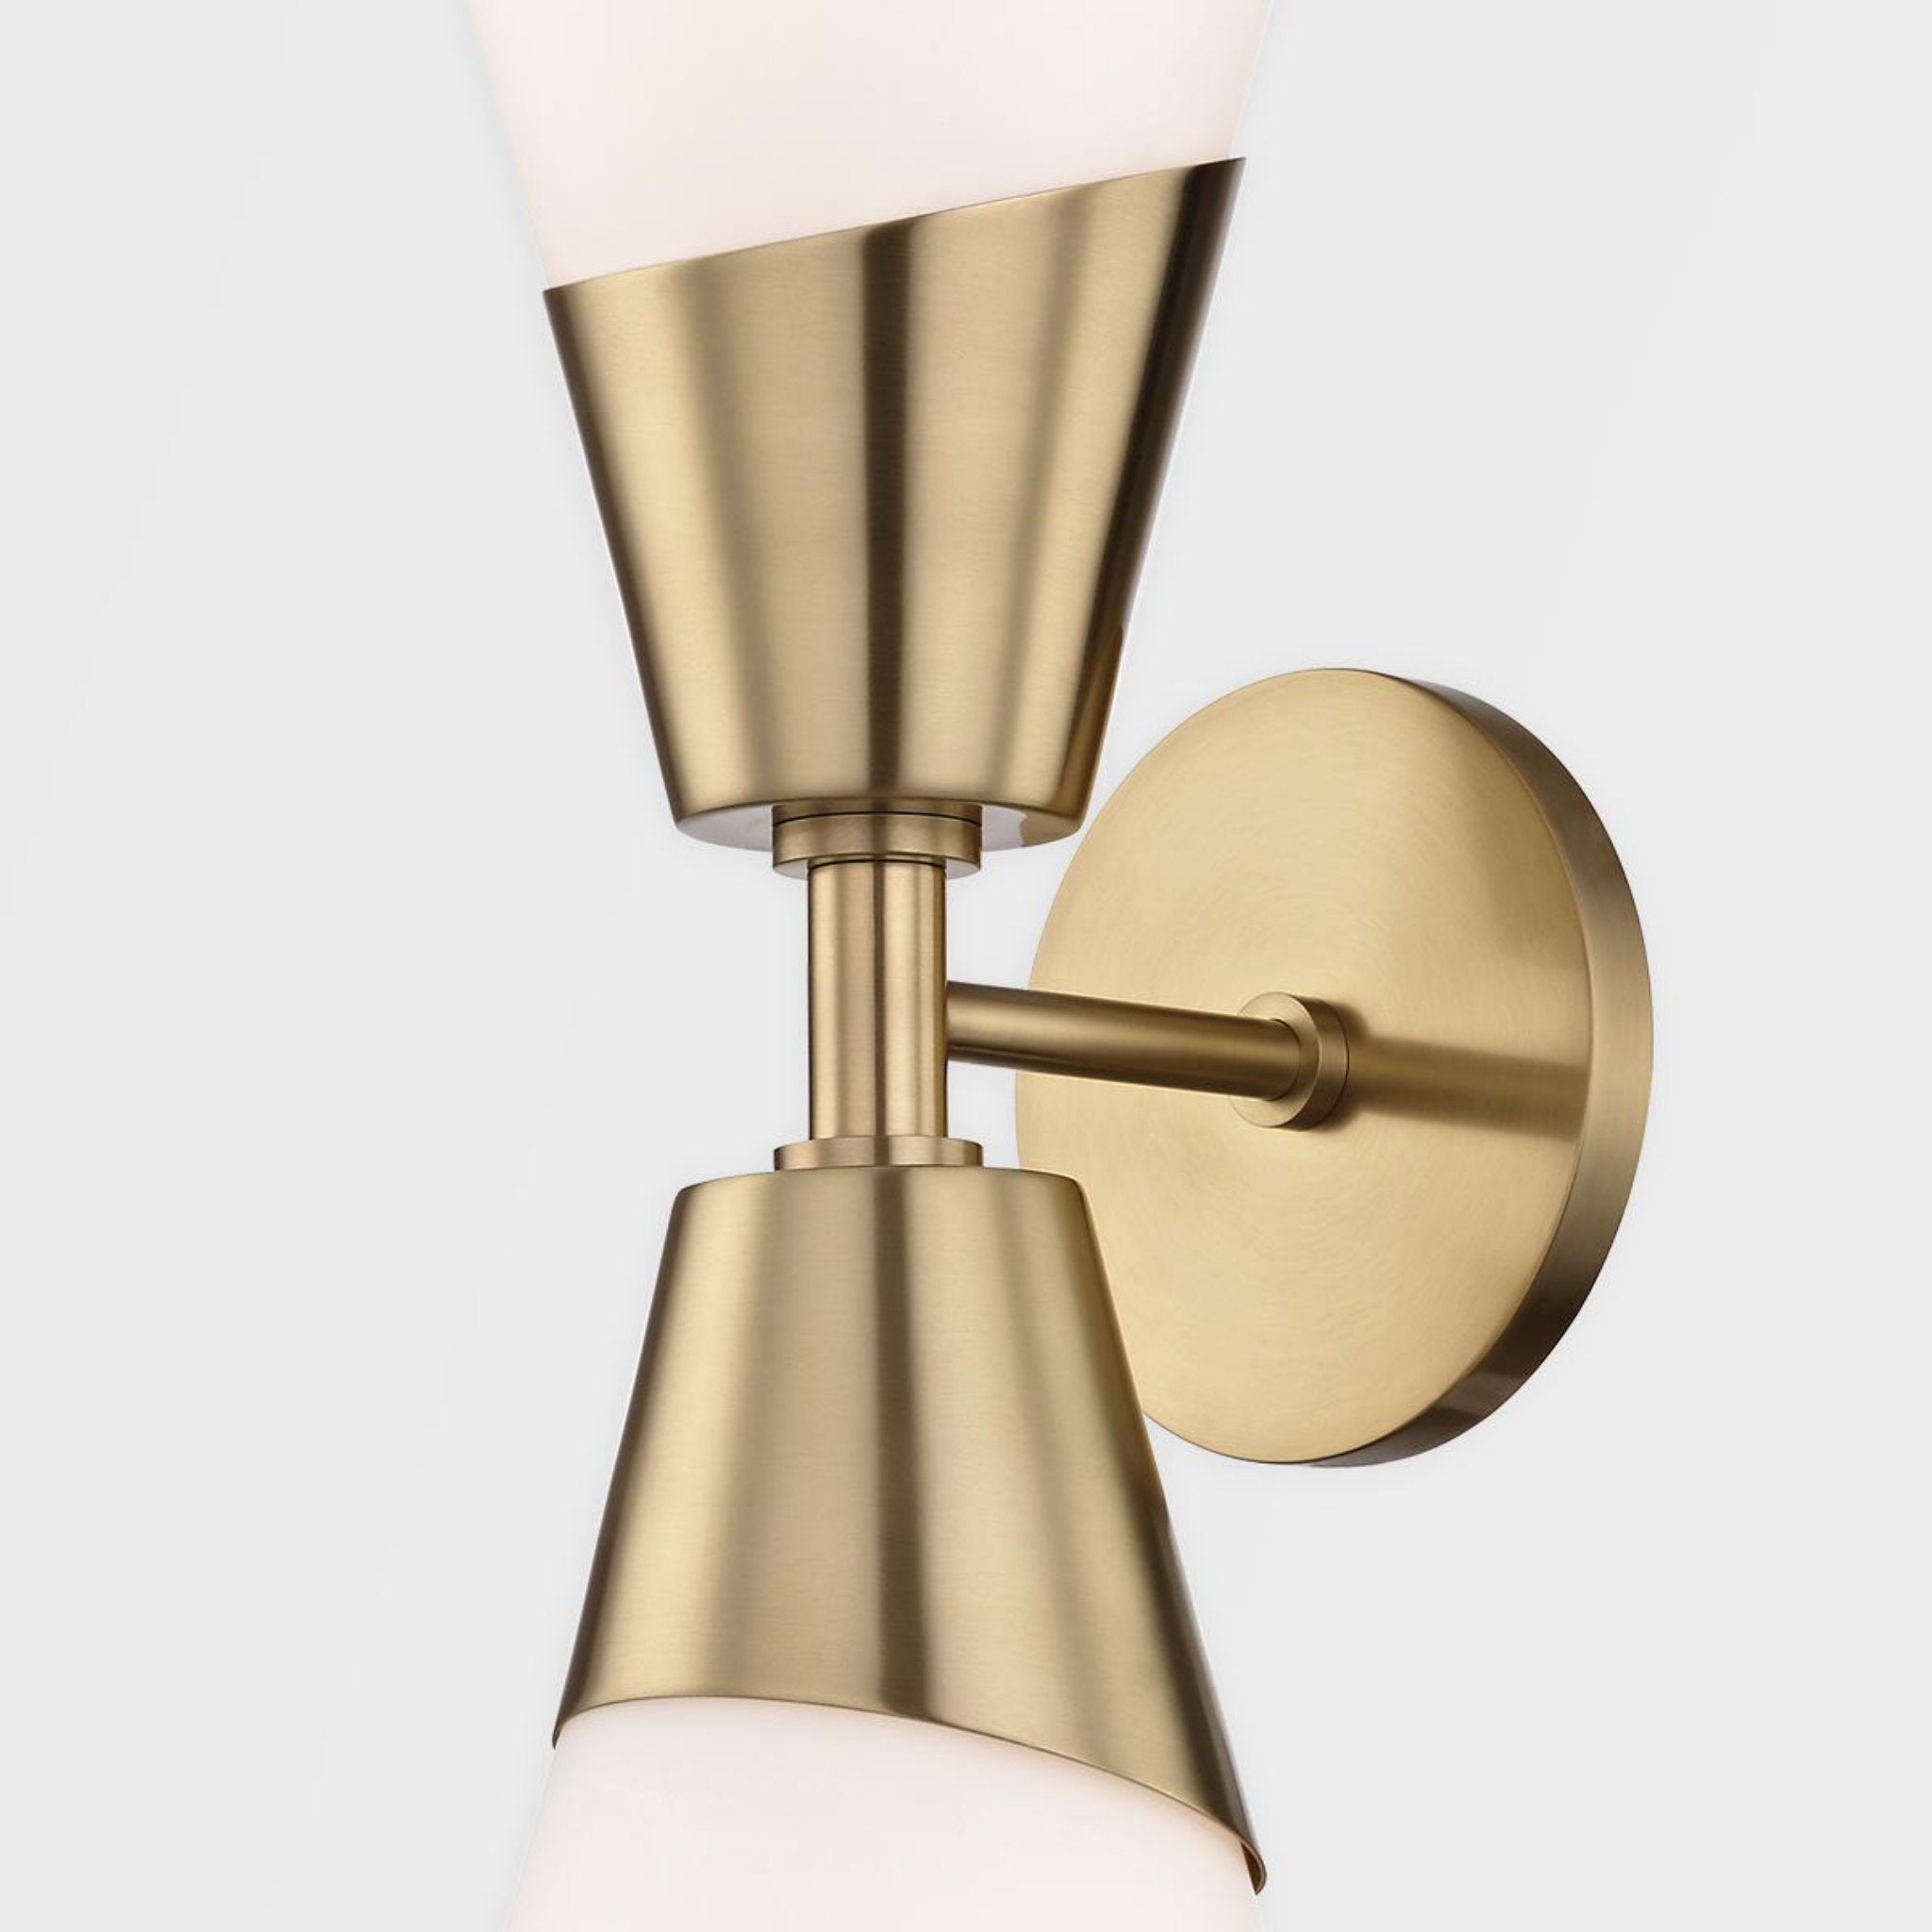 Cora 2-Light Wall Sconce in Polished Nickel